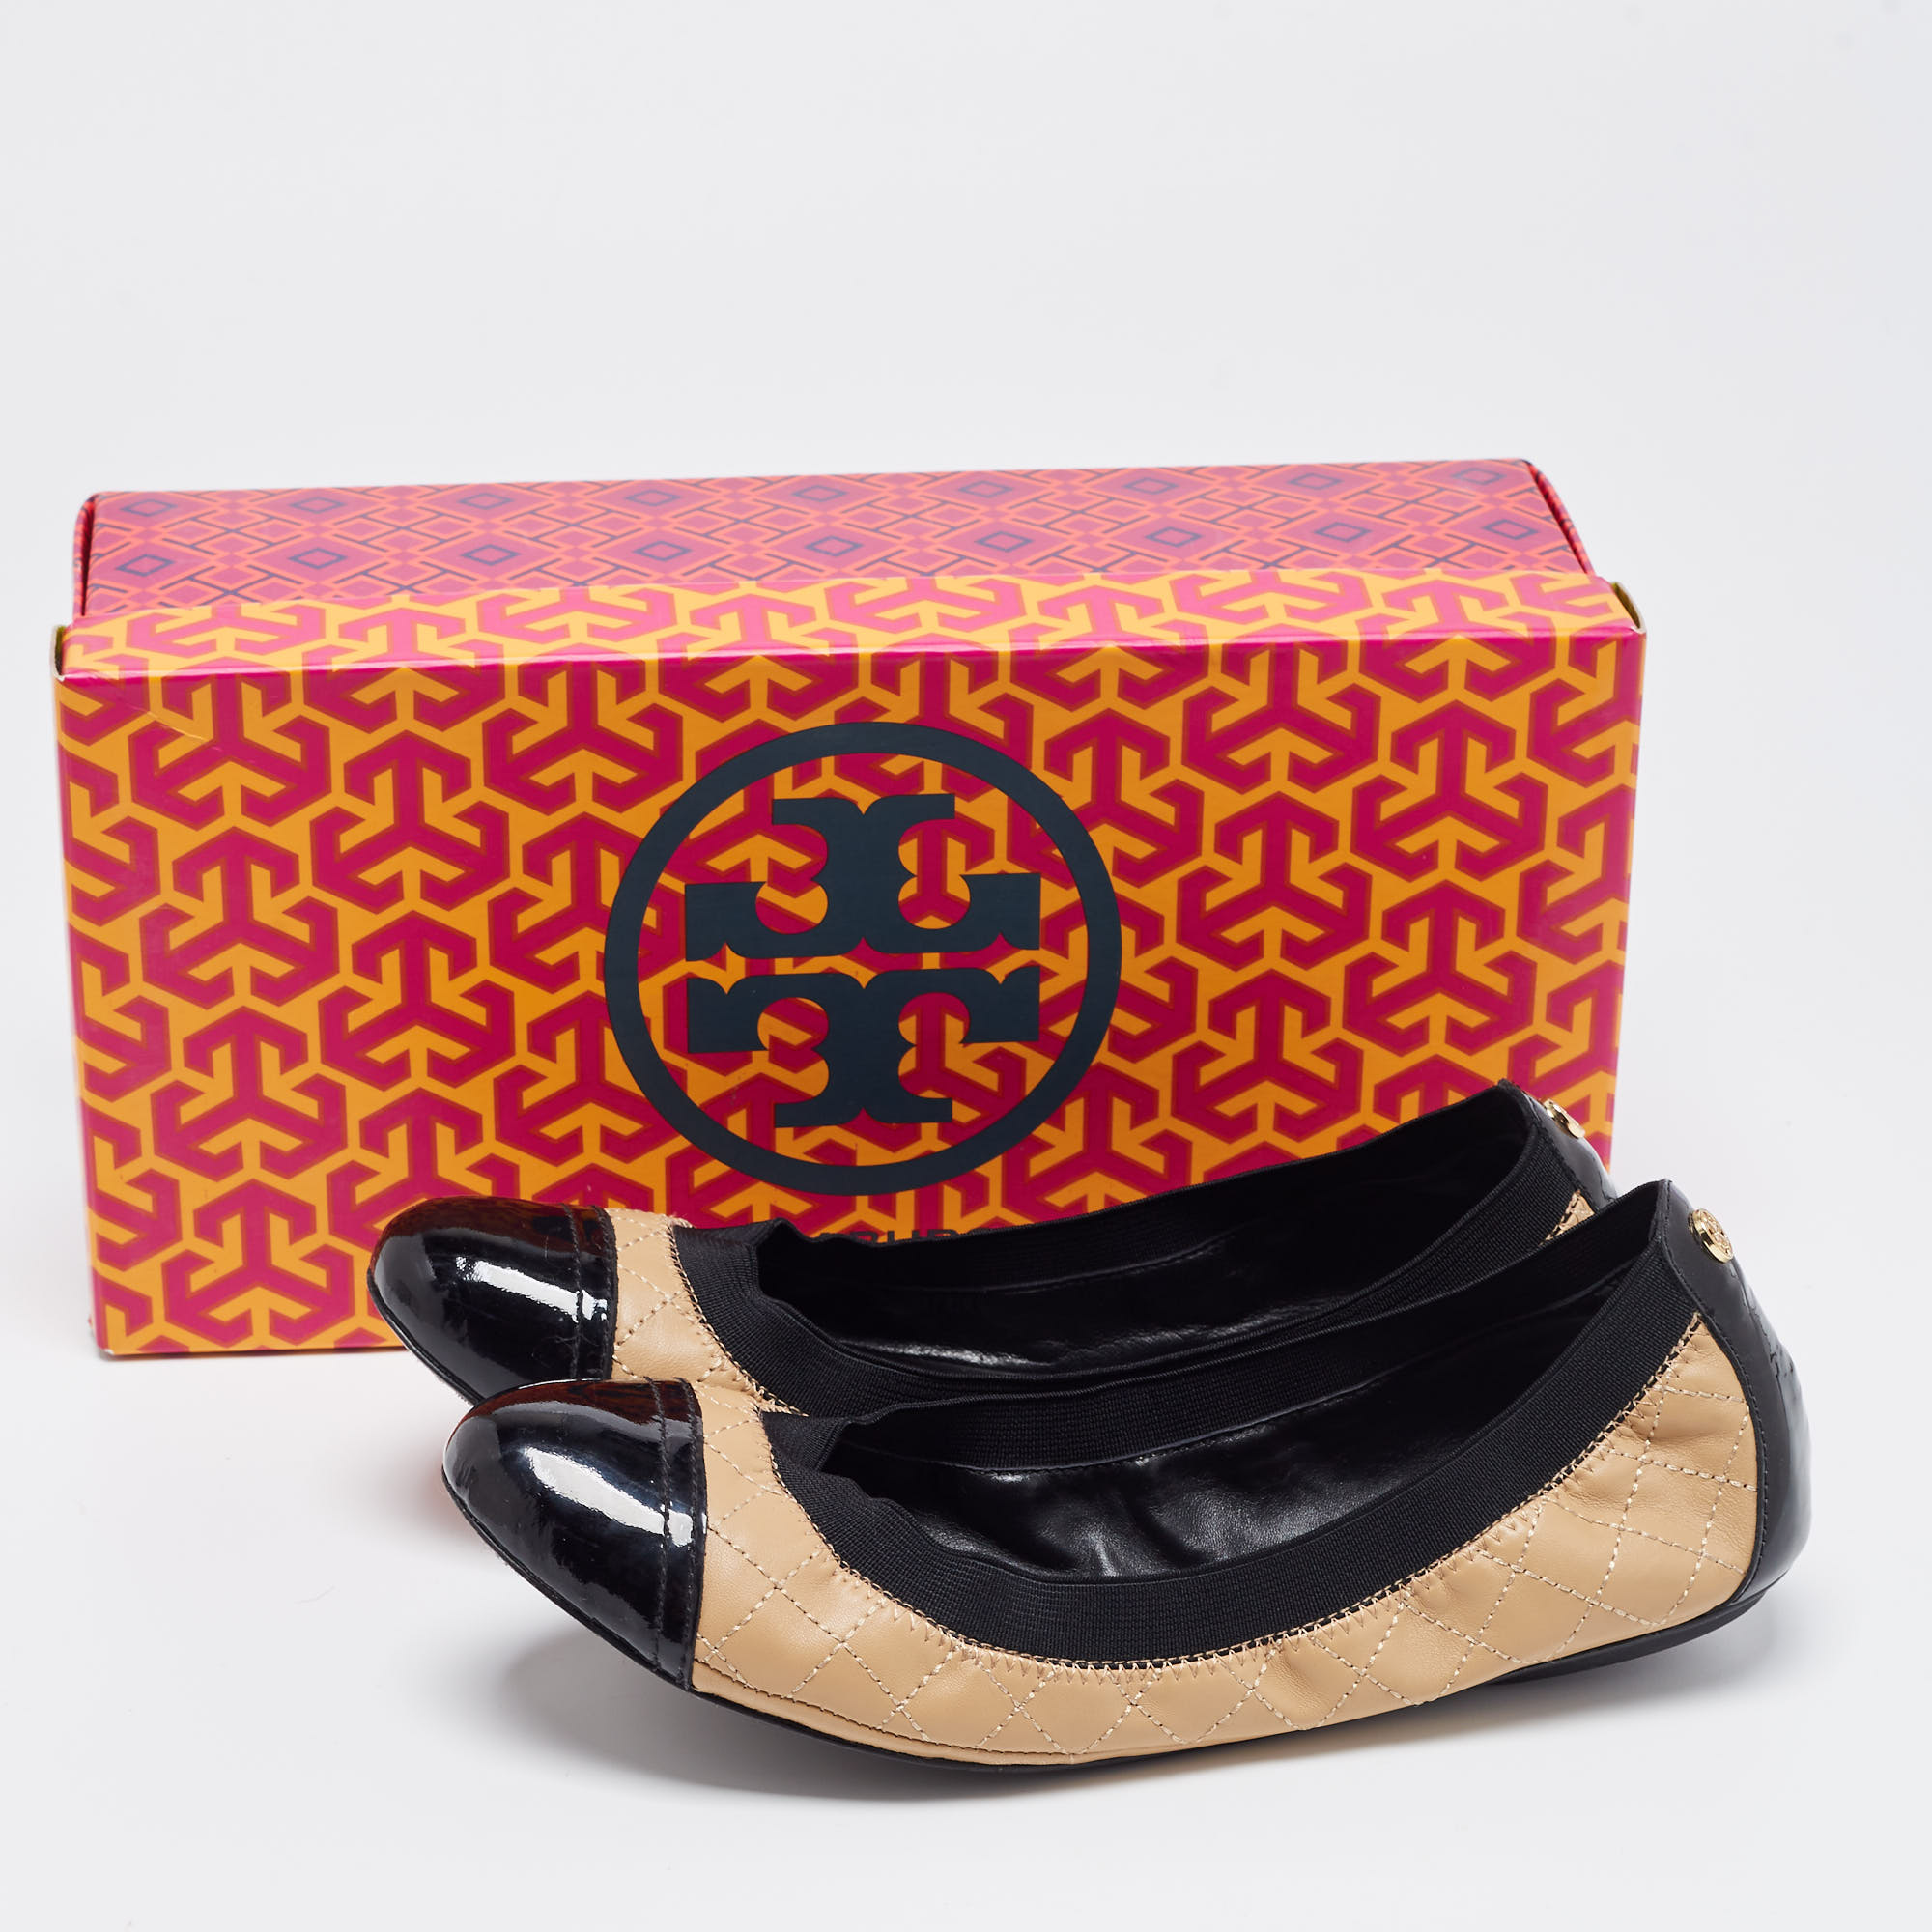 Tory Burch Beige/Black Patent And Leather Quilted Detail Scrunch Ballet Flats Size 38.5